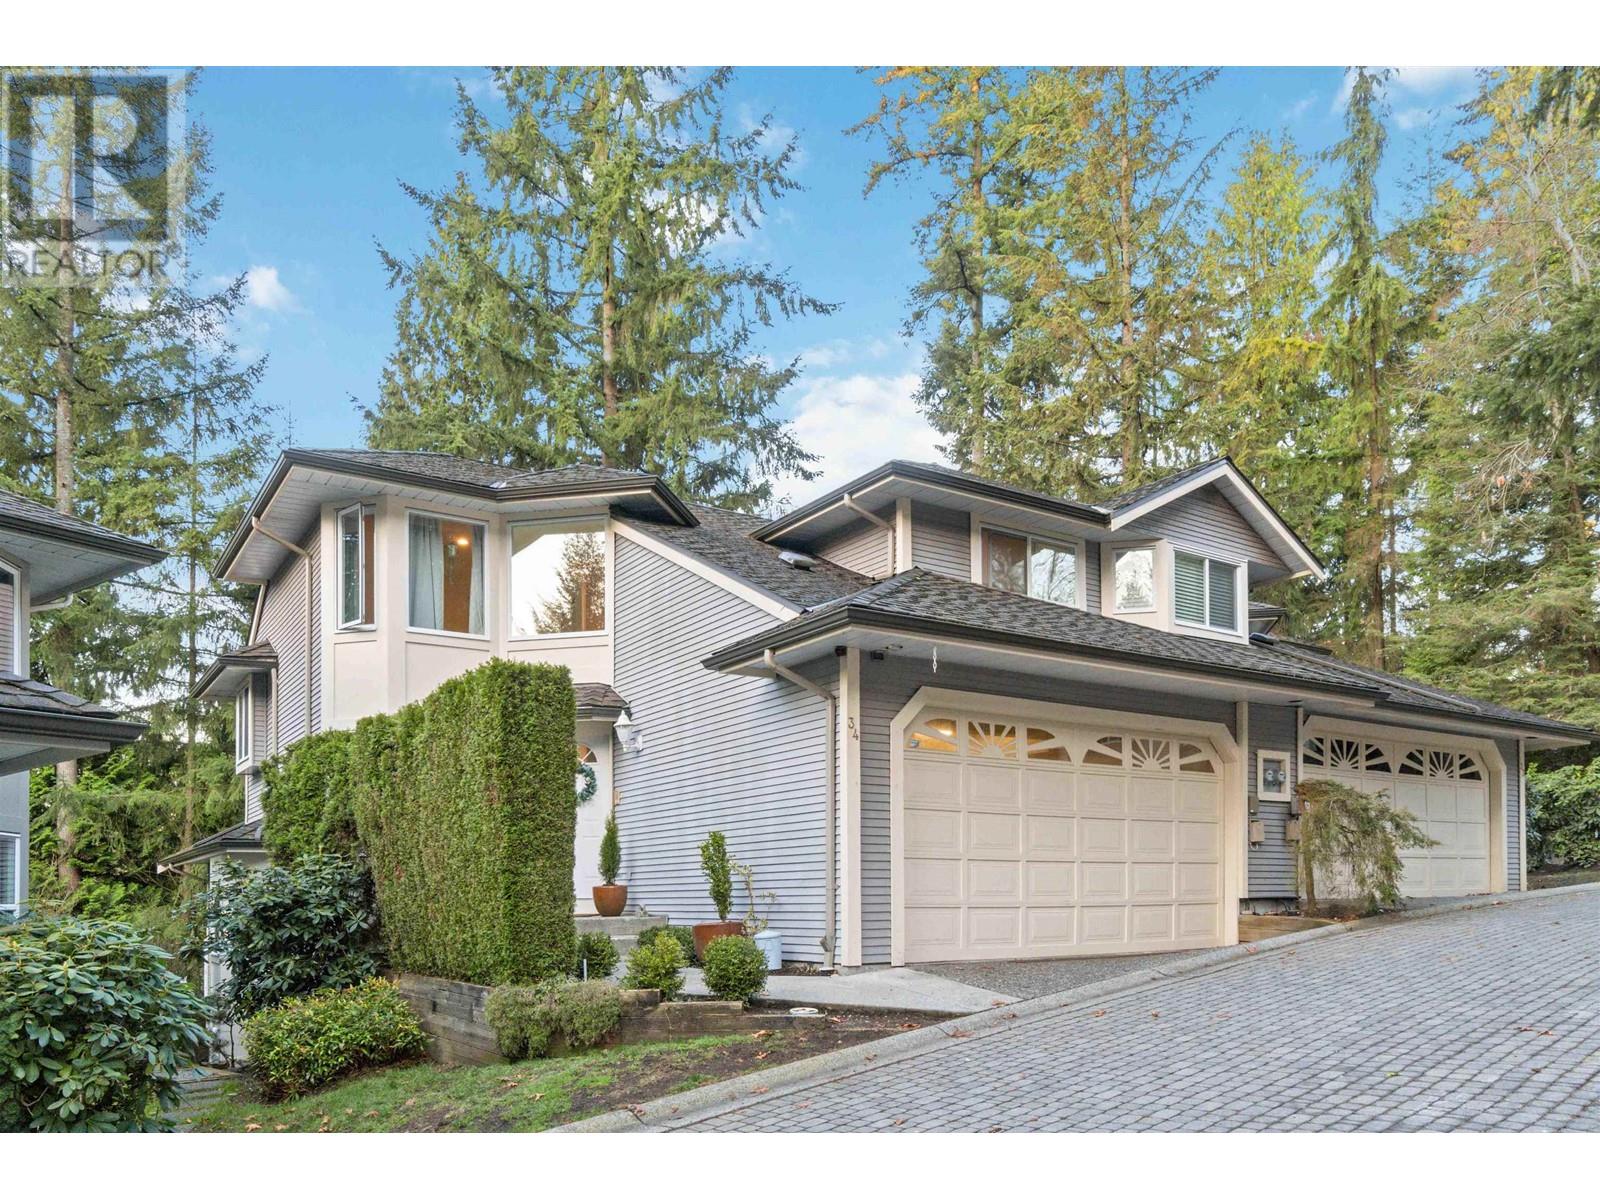 34 101 PARKSIDE DRIVE, port moody, British Columbia